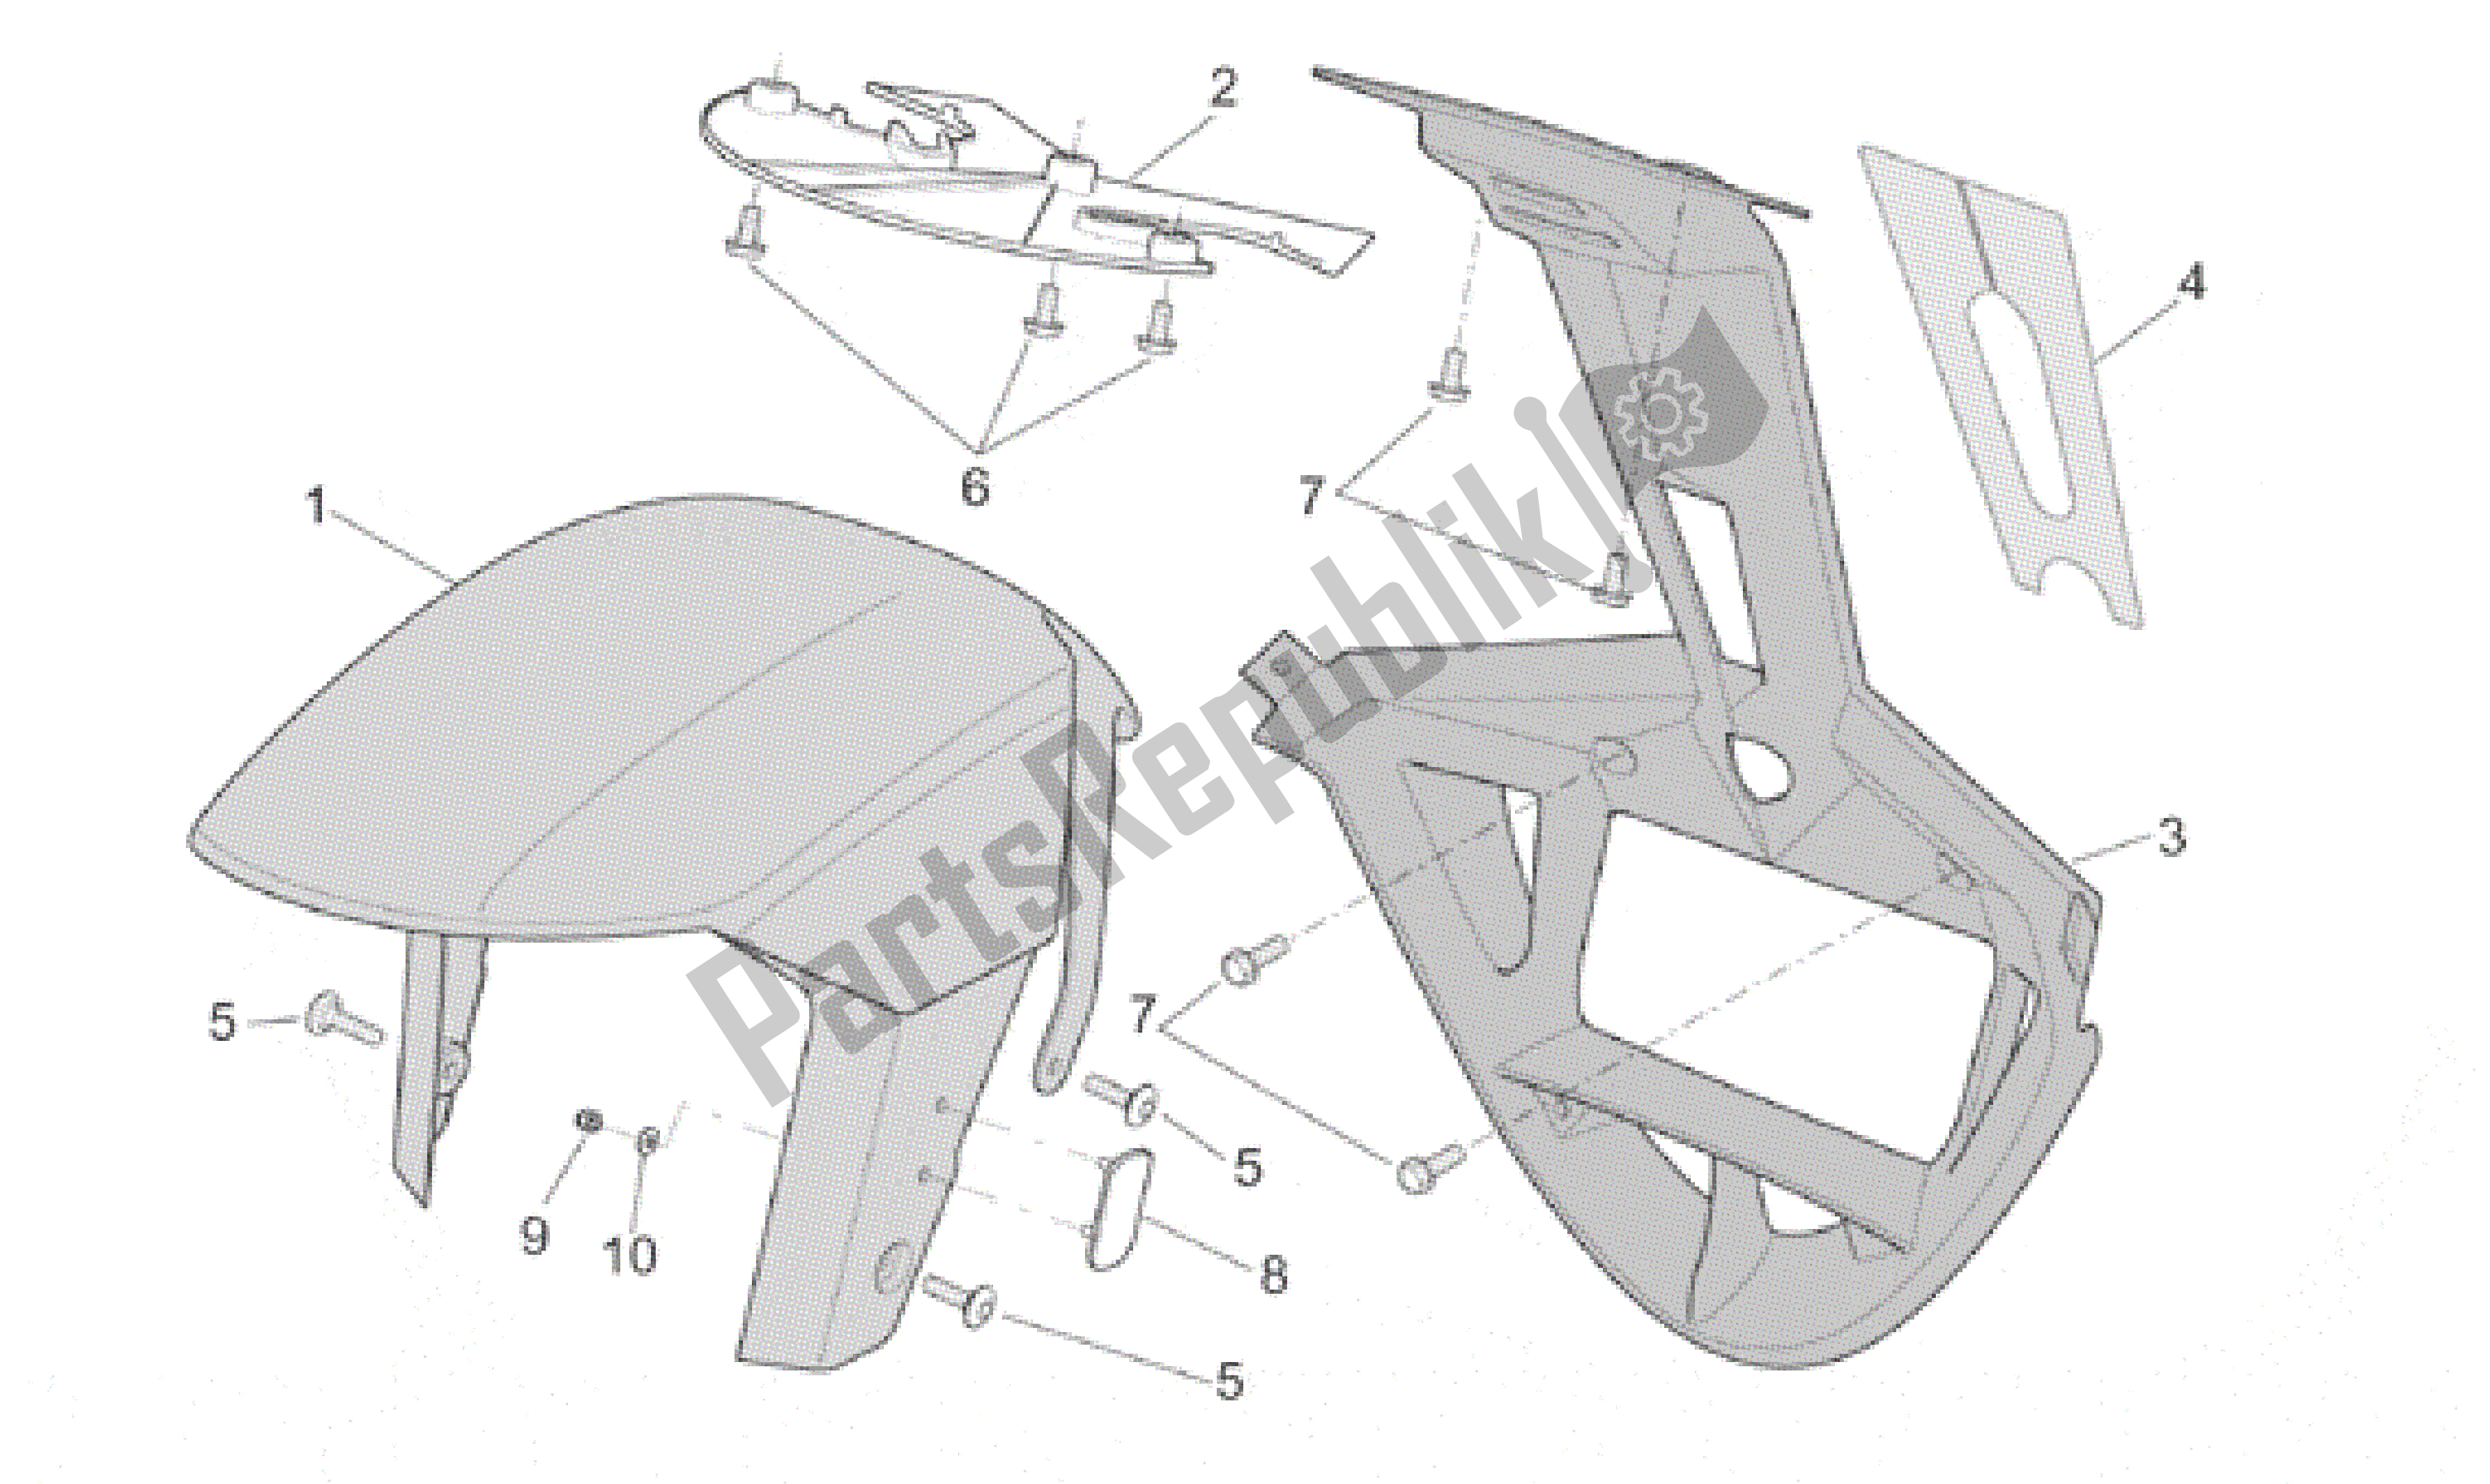 All parts for the Front Body - Front Mudguard of the Aprilia RST 1000 2001